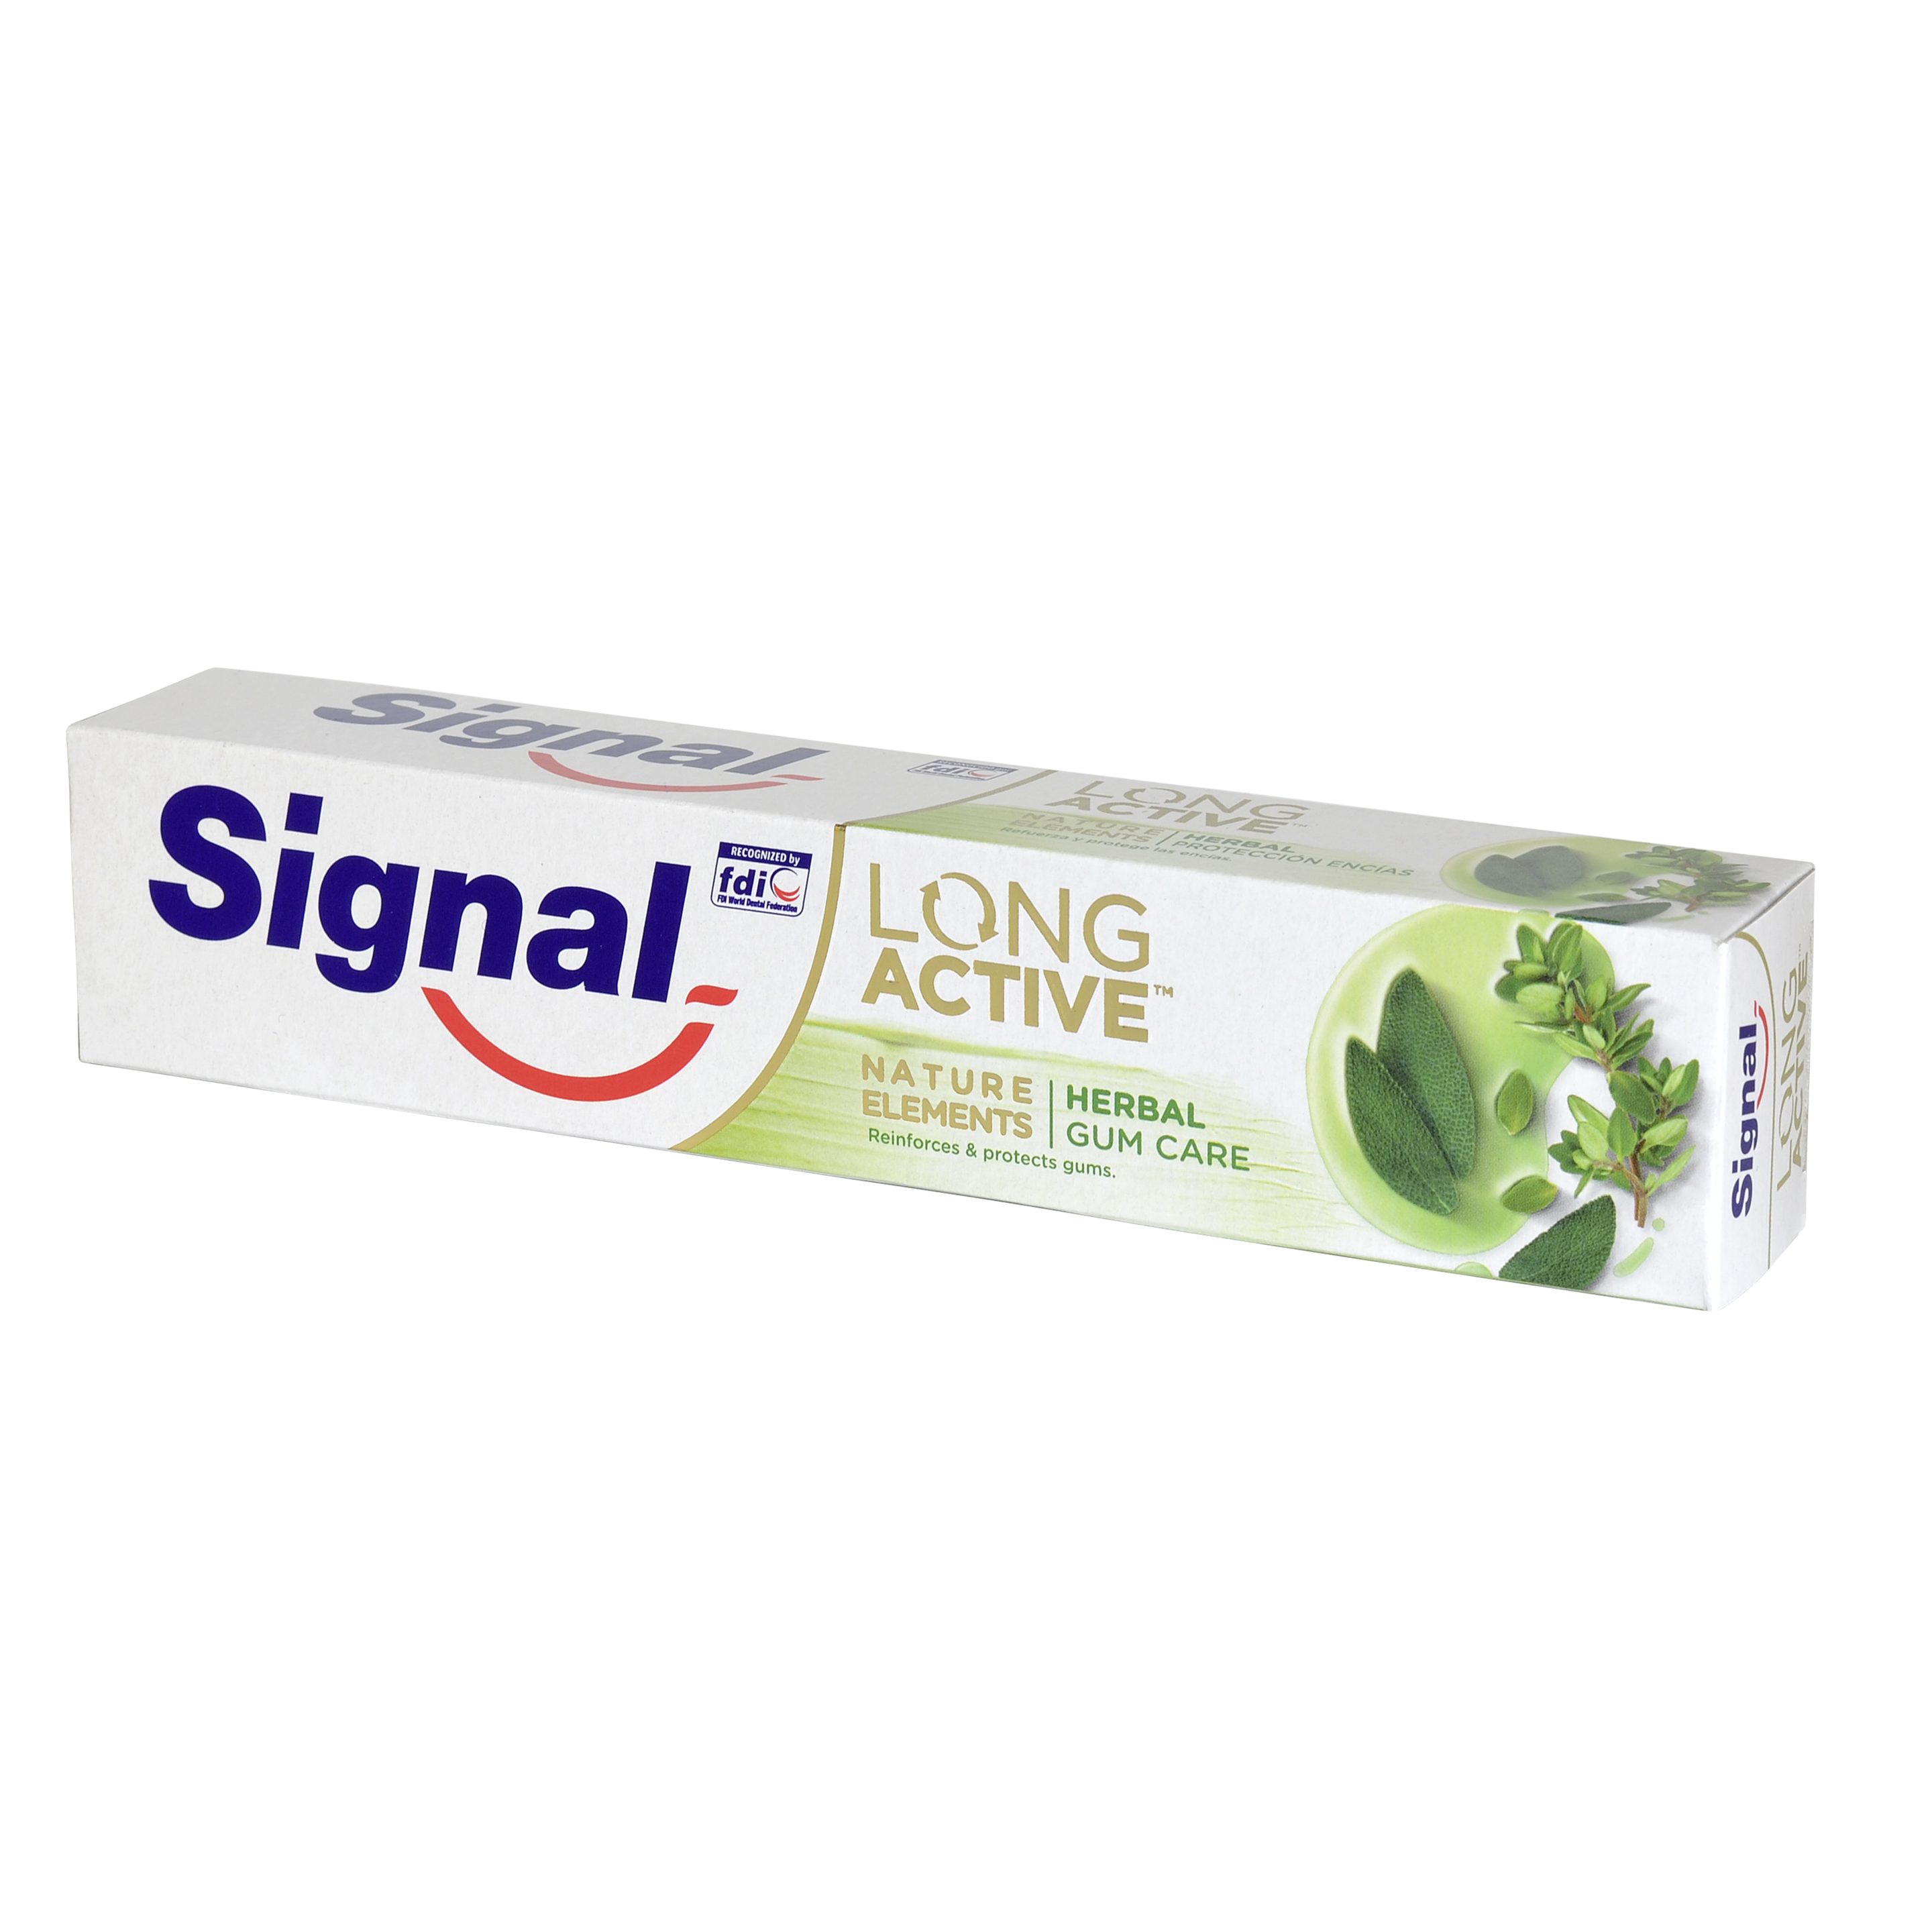 Signal zubní pasta Long Active Nature Elements Herbal Gum Care75ml